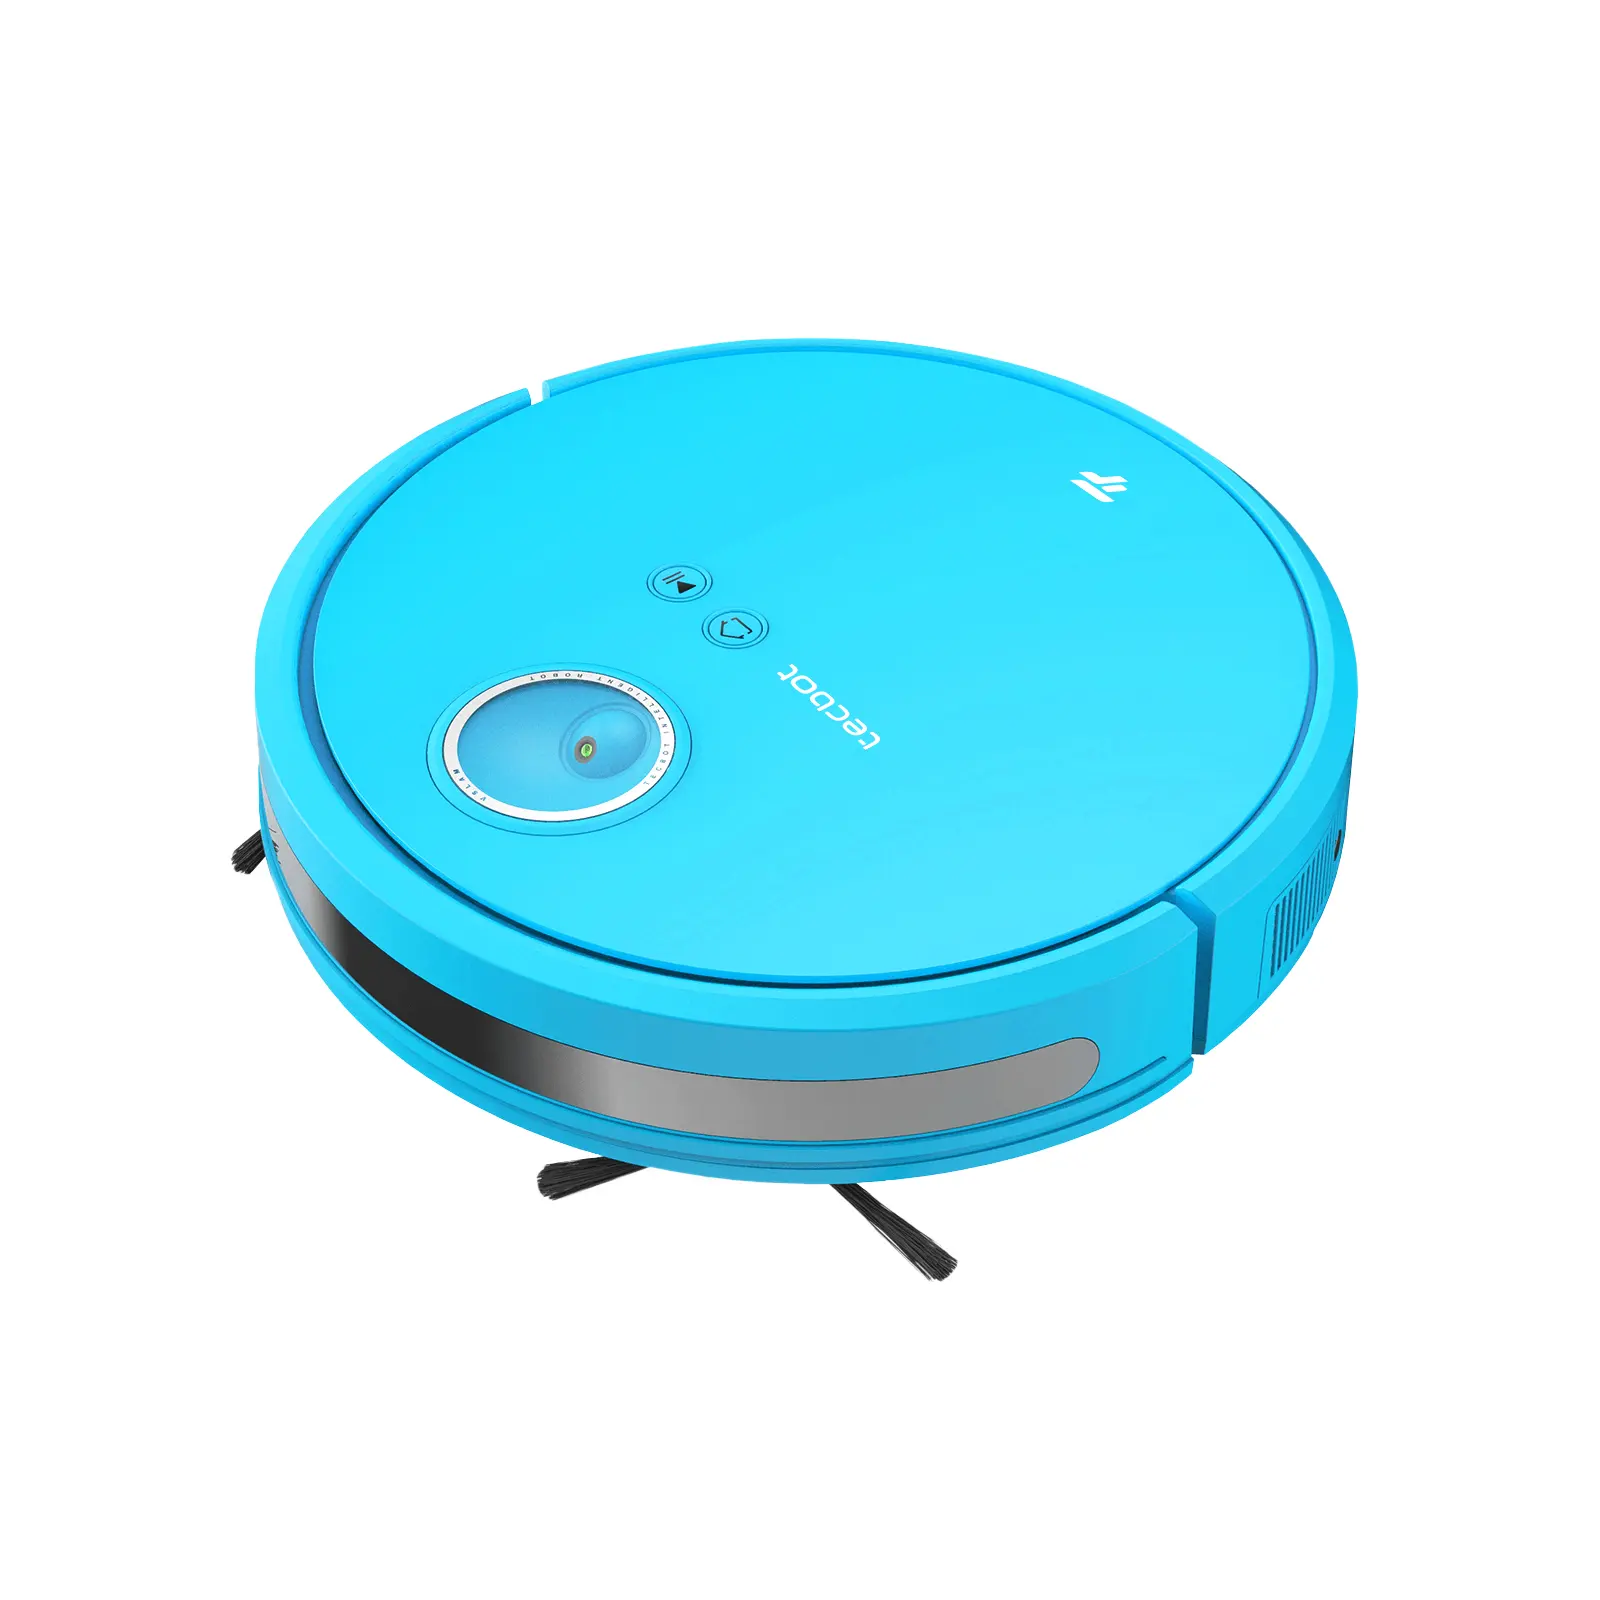 TECBOT S2 Strong Suction Cleaning Appliances Smart Home Robot Vacuum rechargeable Robot vacuum sweeping and mopping for house